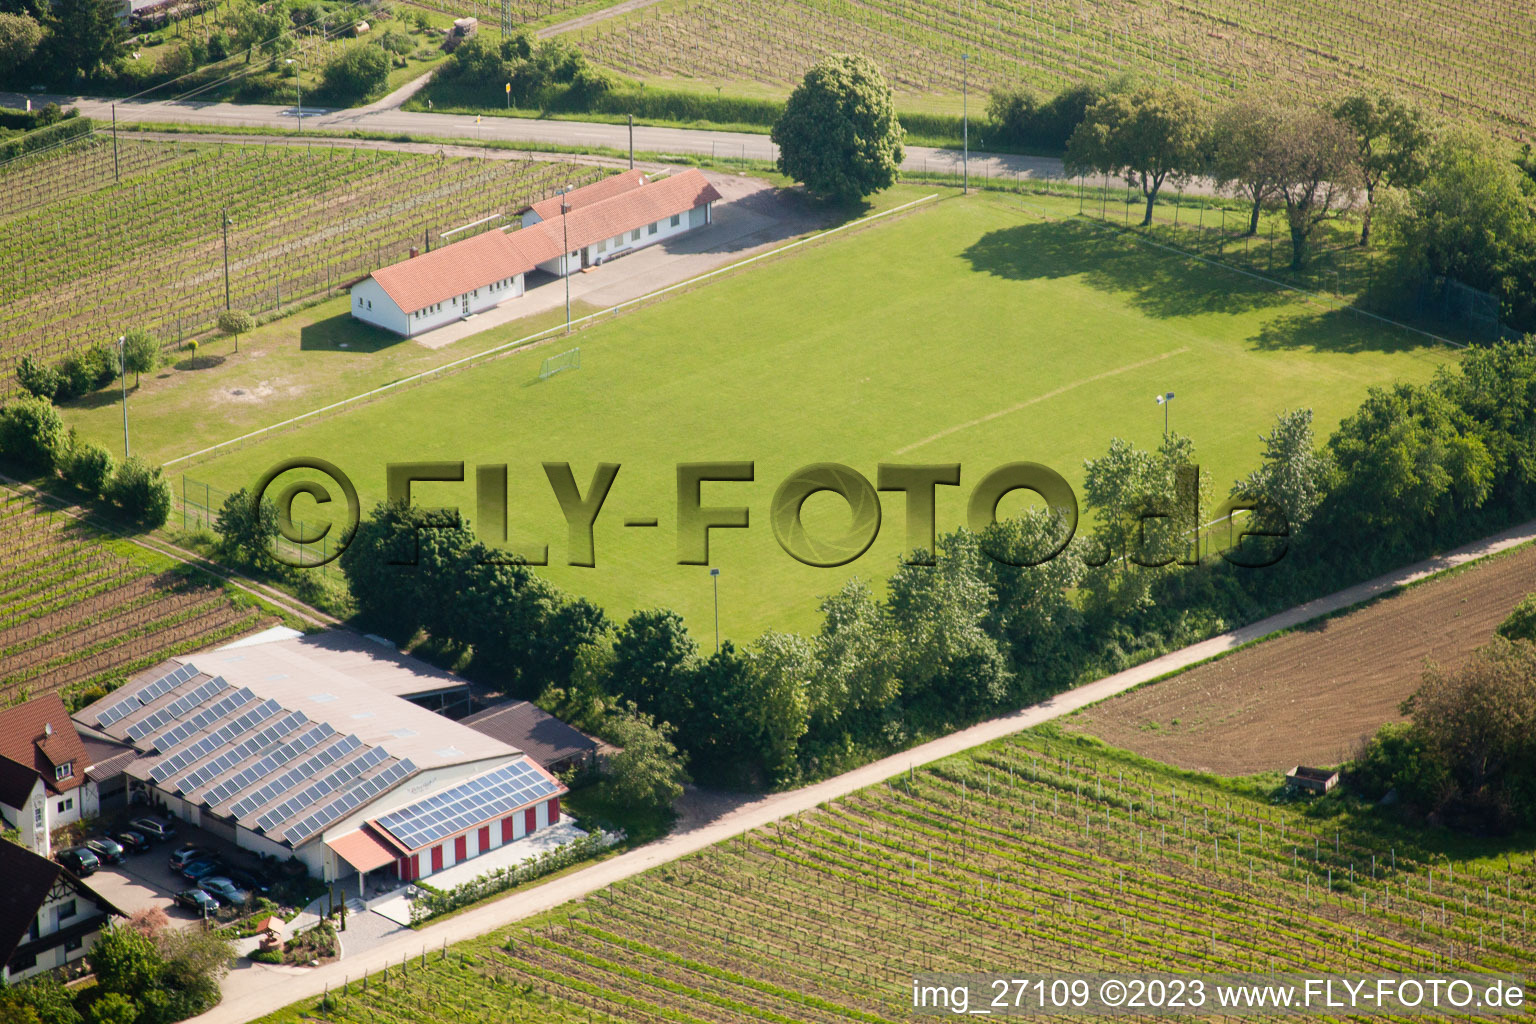 Aerial photograpy of Sports ground in Impflingen in the state Rhineland-Palatinate, Germany